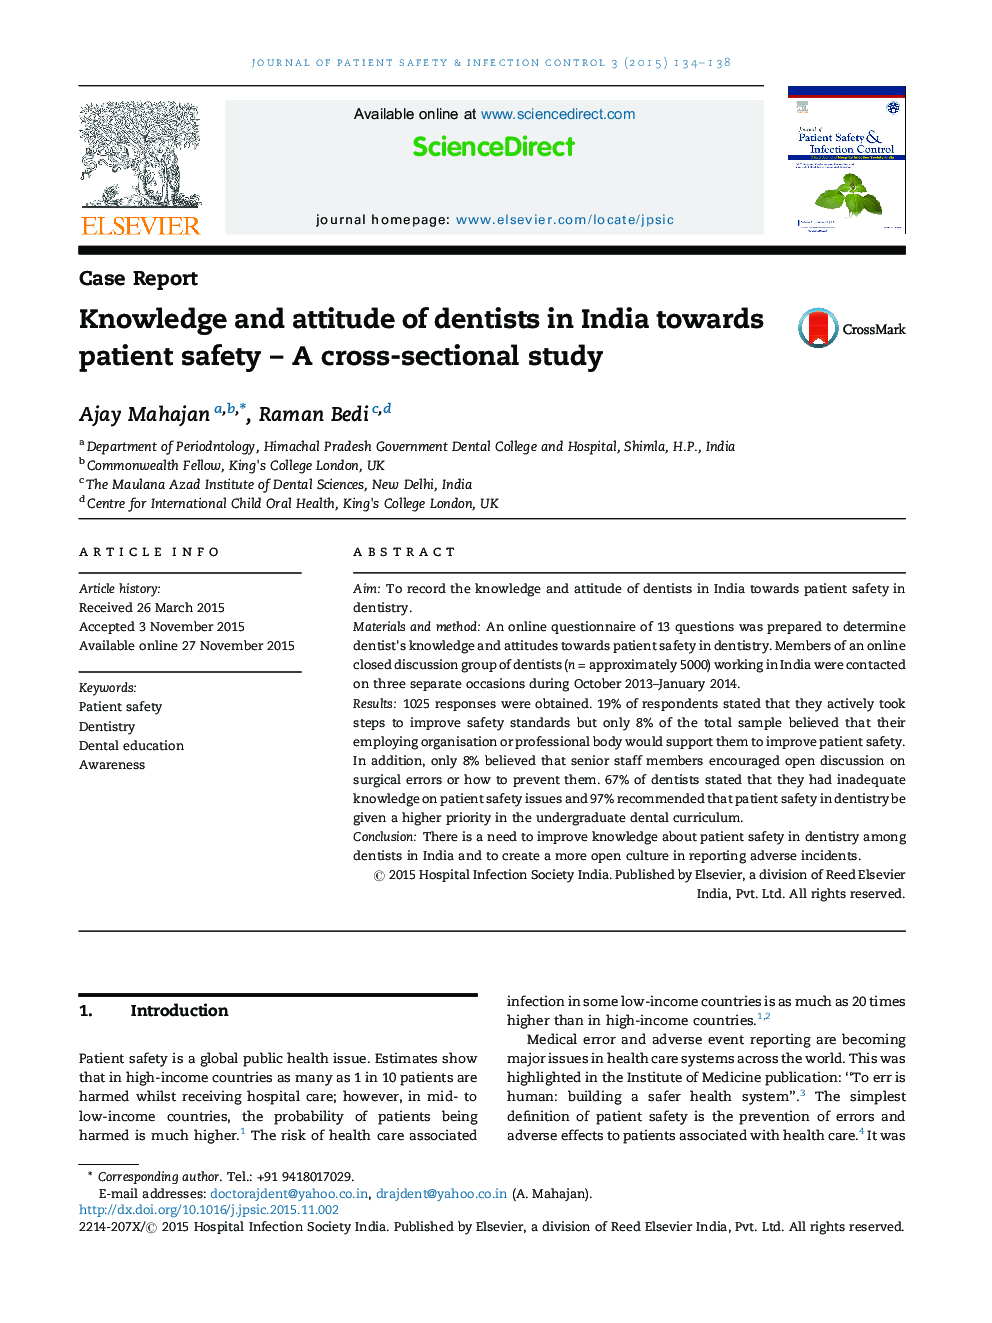 Knowledge and attitude of dentists in India towards patient safety – A cross-sectional study